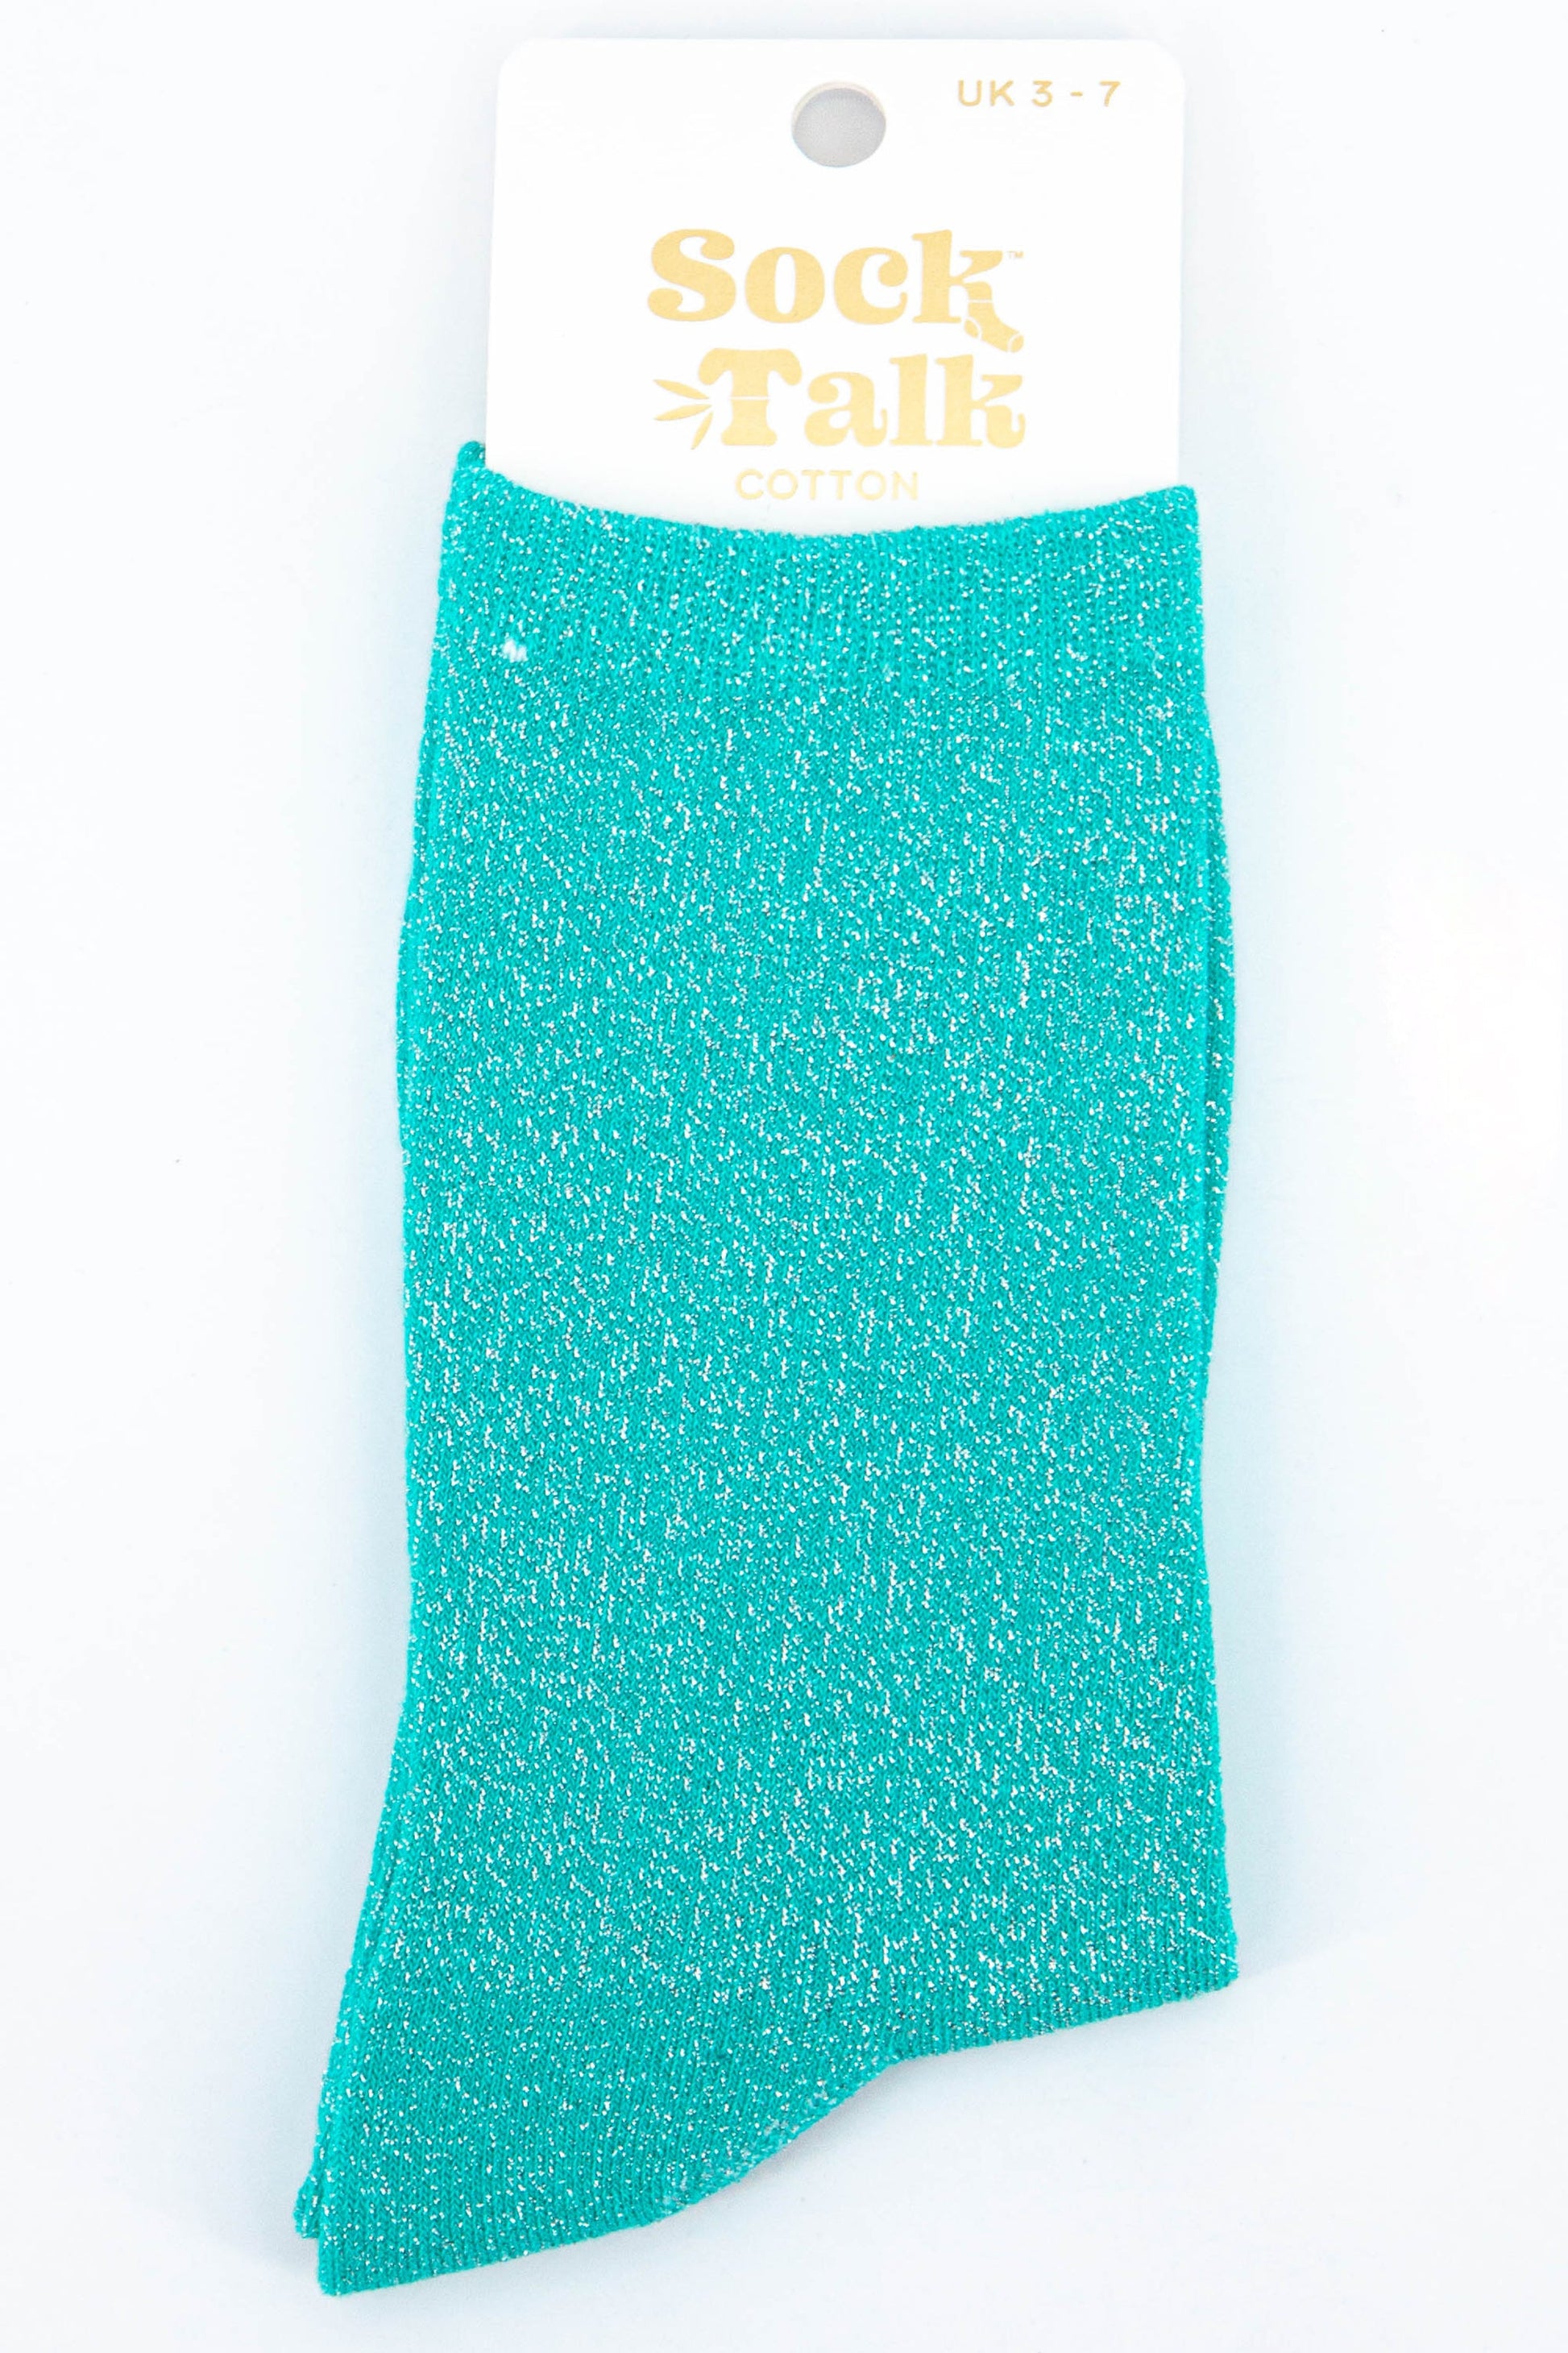 womens glitter socks in turquoise with an all over sparkle, uk size 3-7